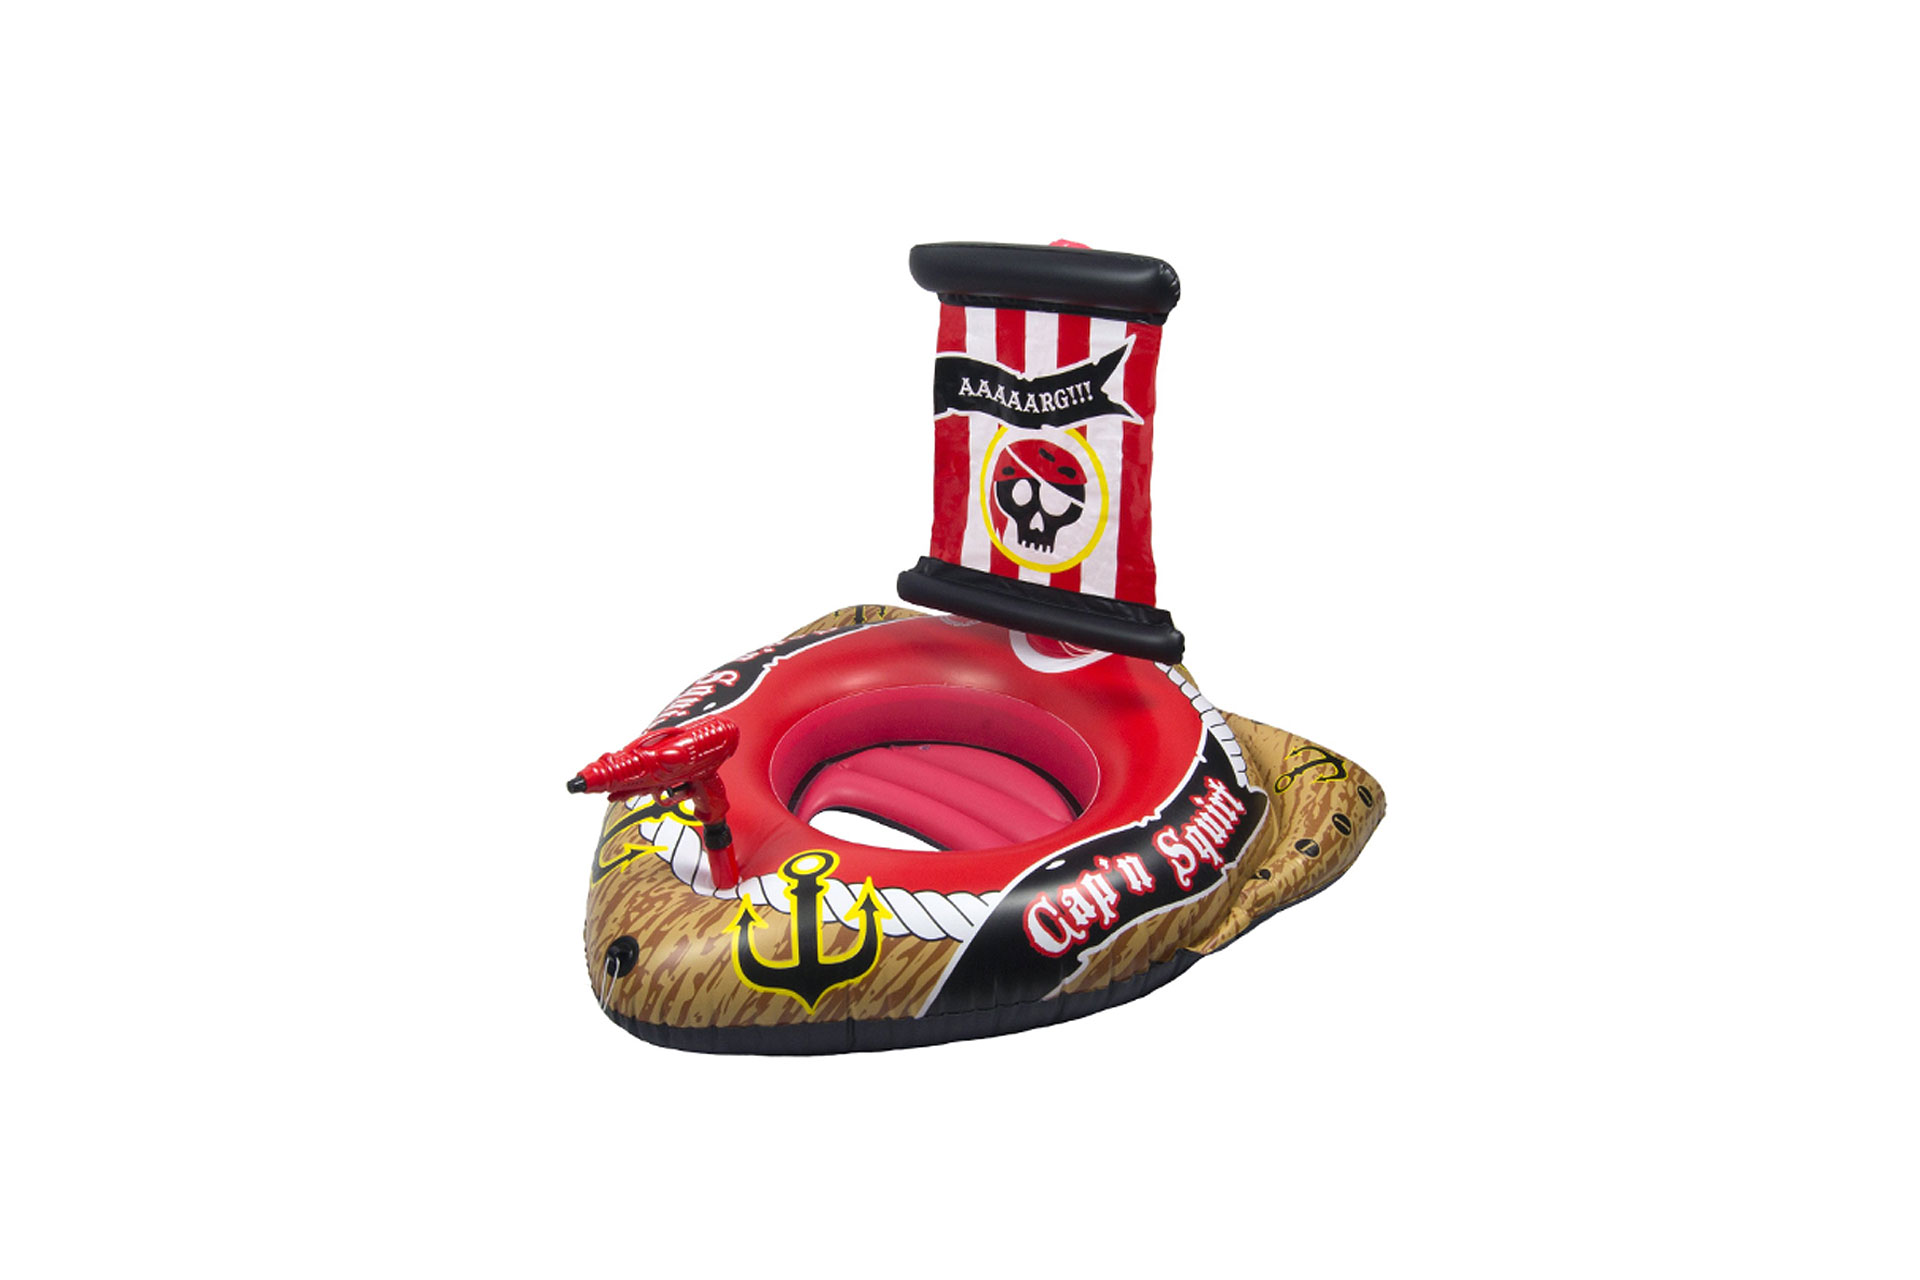 Poolmaster Pirate Ship with Action Squirter; Courtesy of Amazon